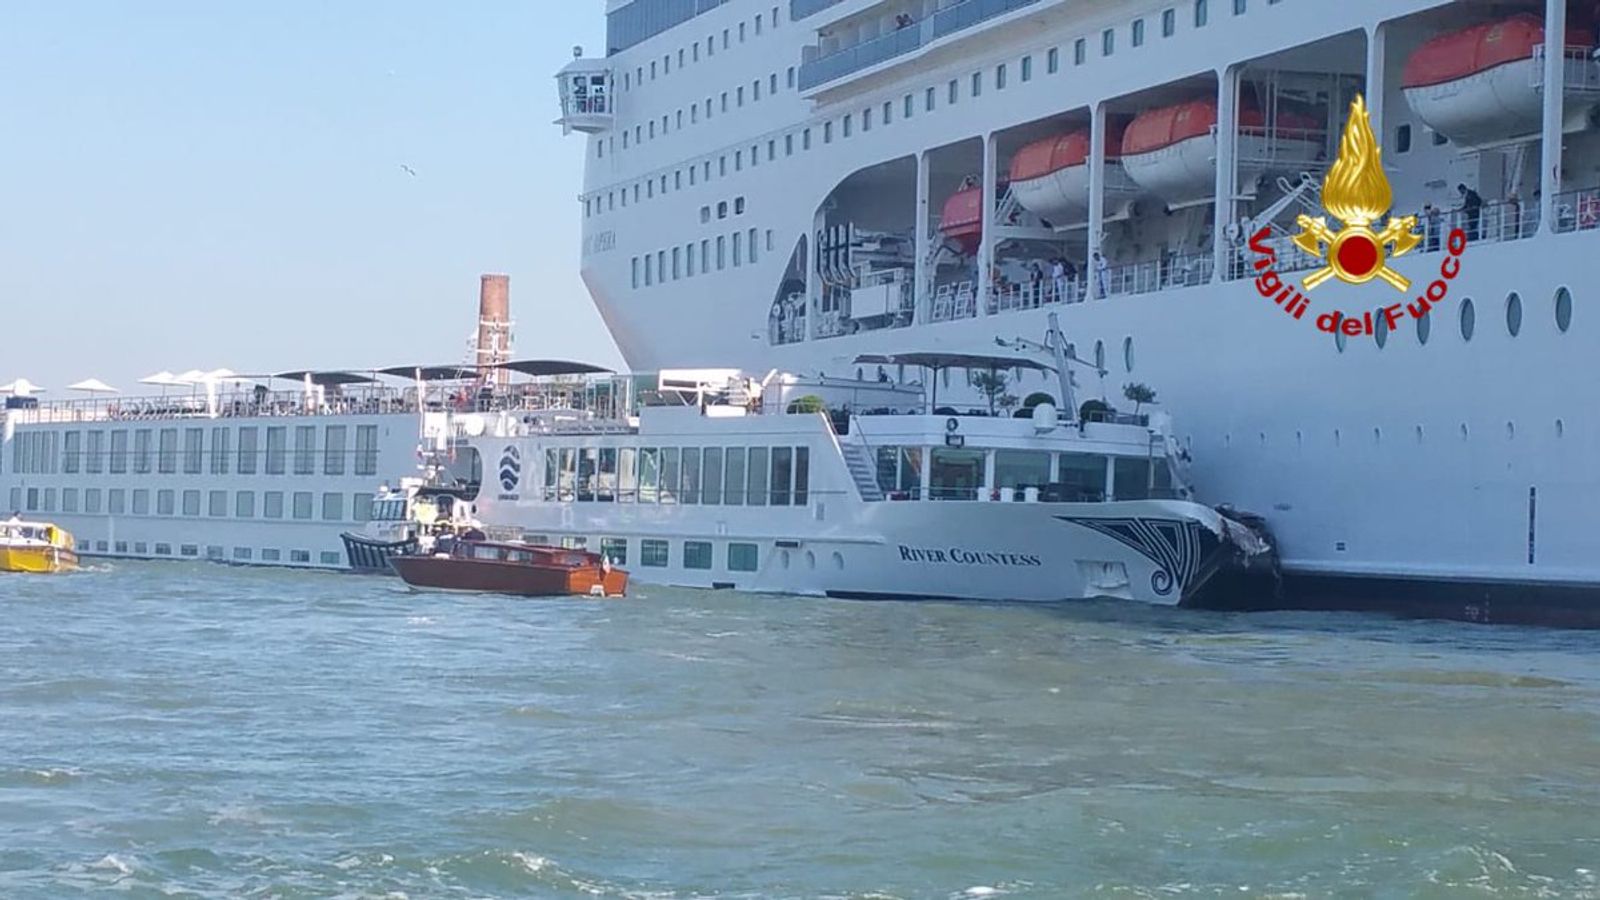 Cruise ship crashes into dock and tourist boat in Venice World News